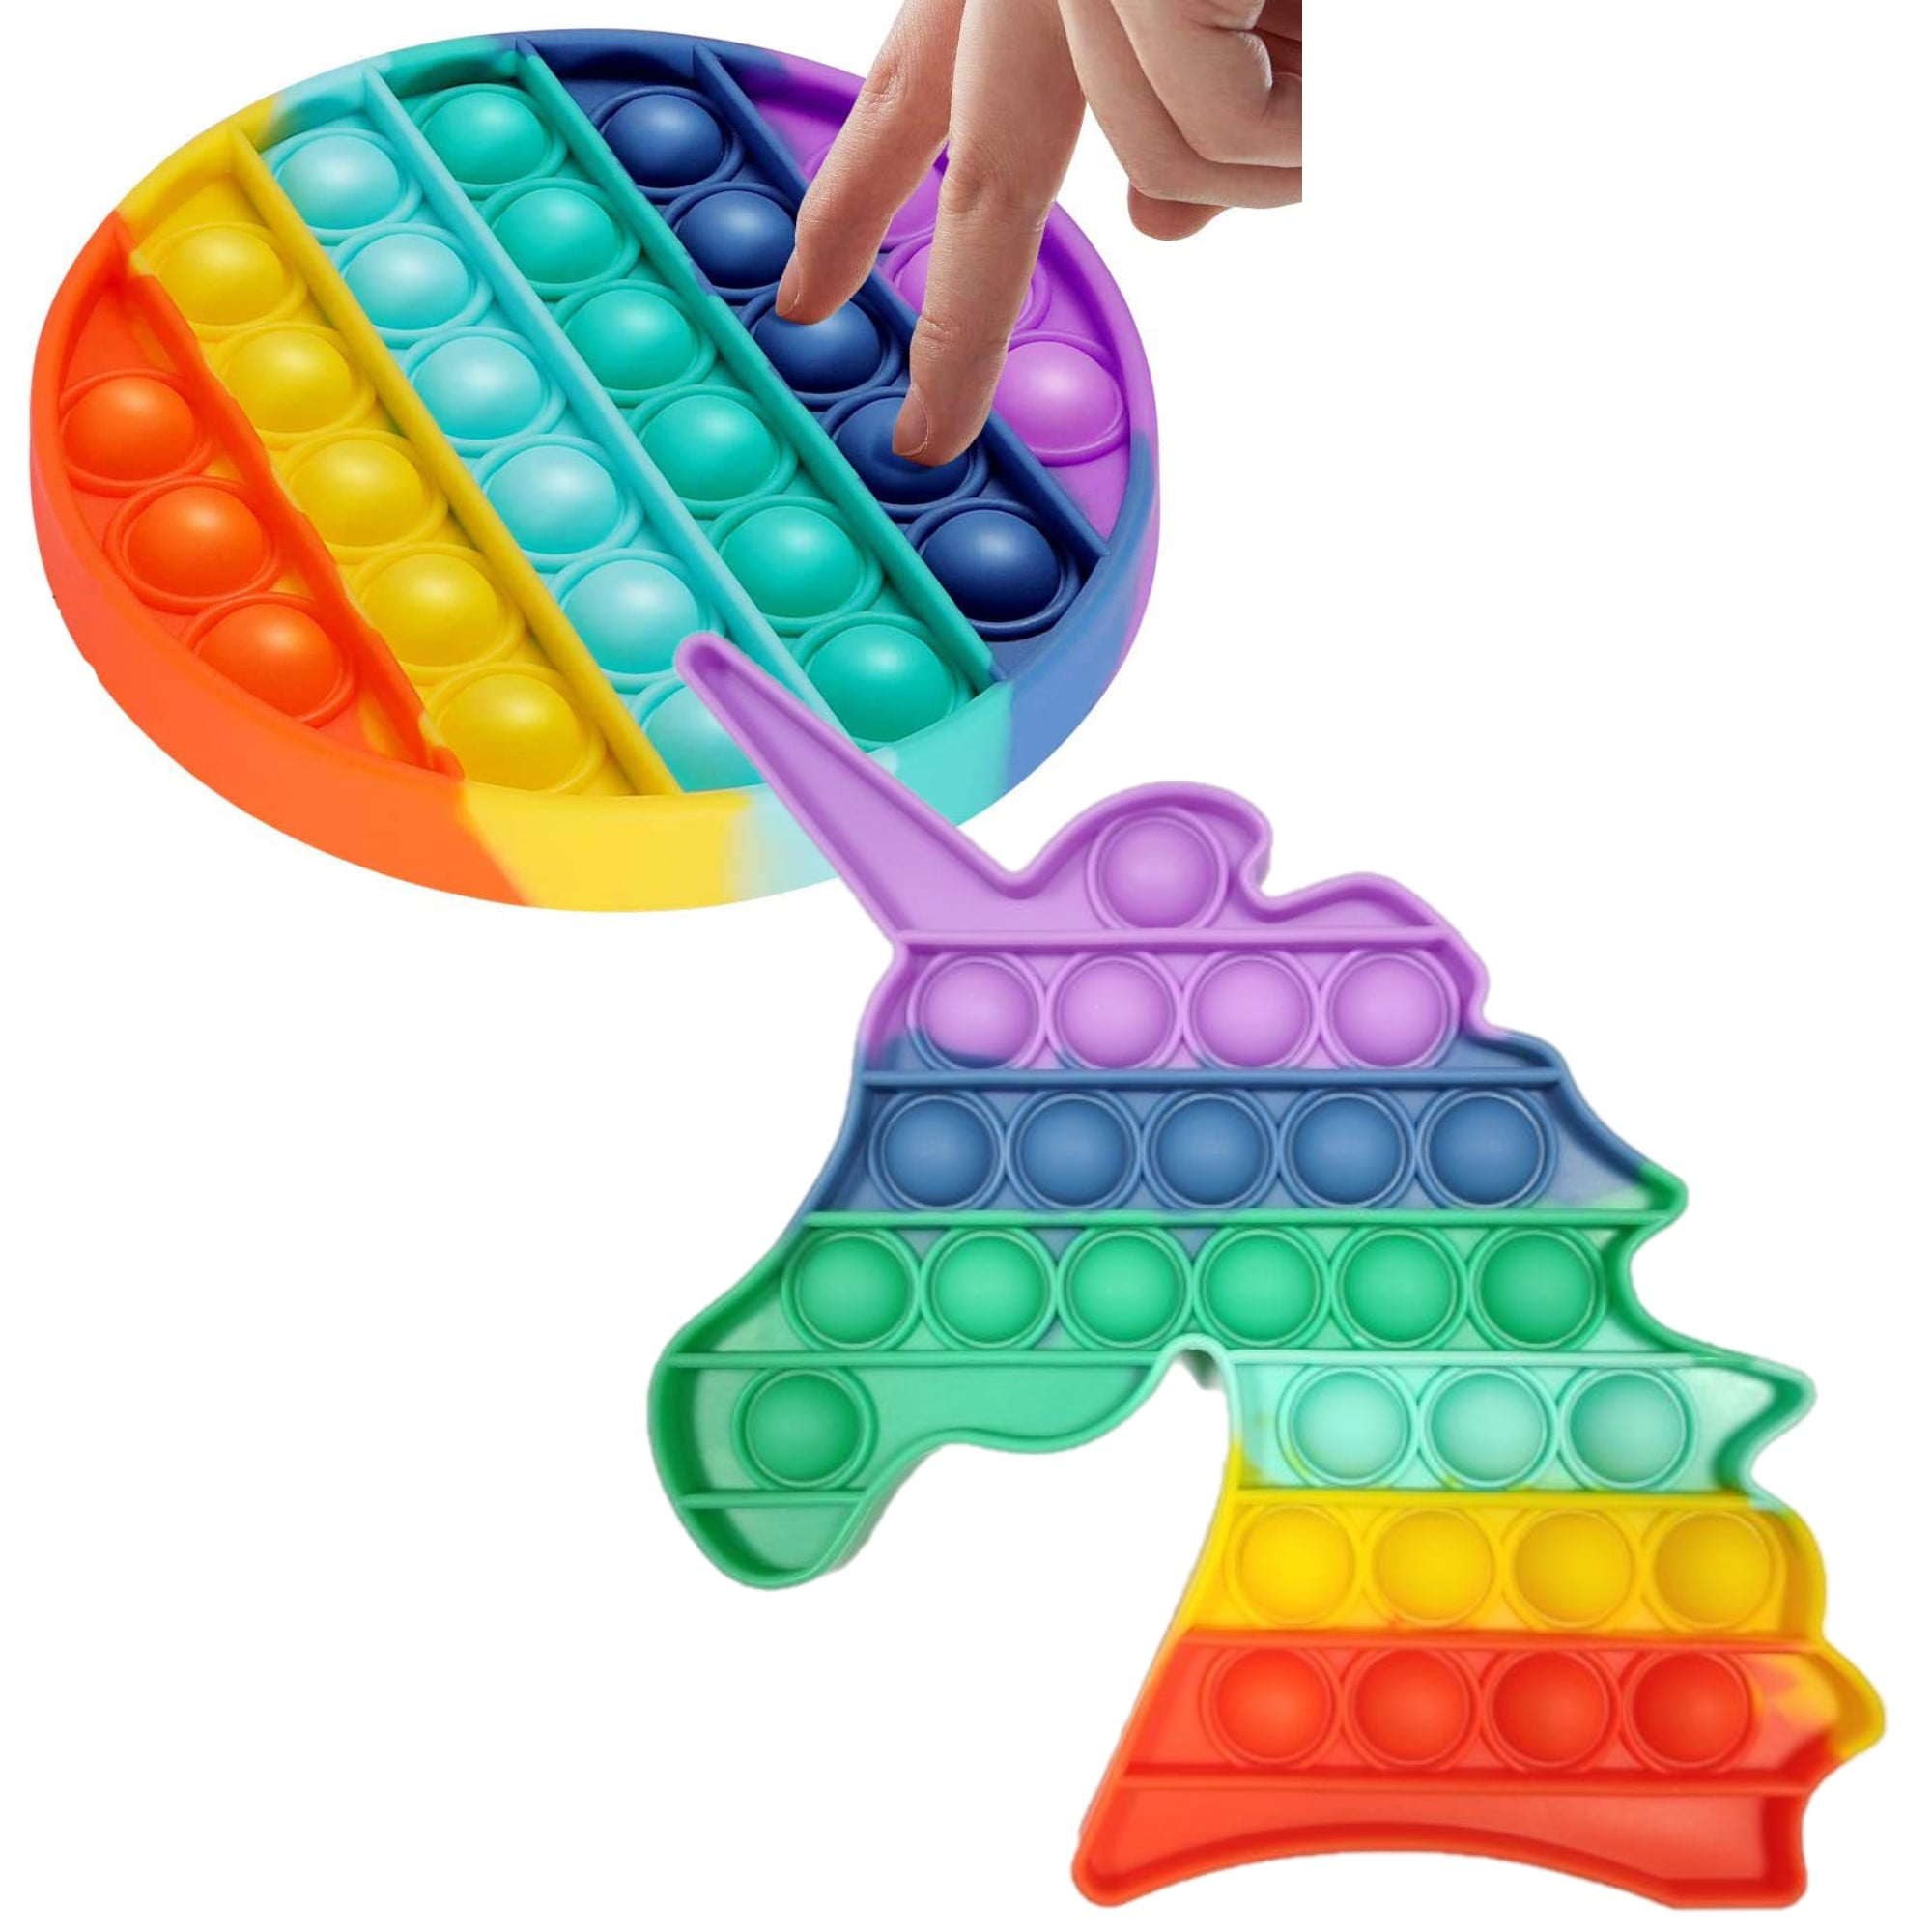 Big Unicorn Bubble Fidget Toys Large Rainbow Fidget Push Popper Stress Relief Anti-Anxiety Silicone Squeeze Toys Pop It Unicorn Sensory Toy Autism Special Needs for Kids and Adult Pop Fidget Toys